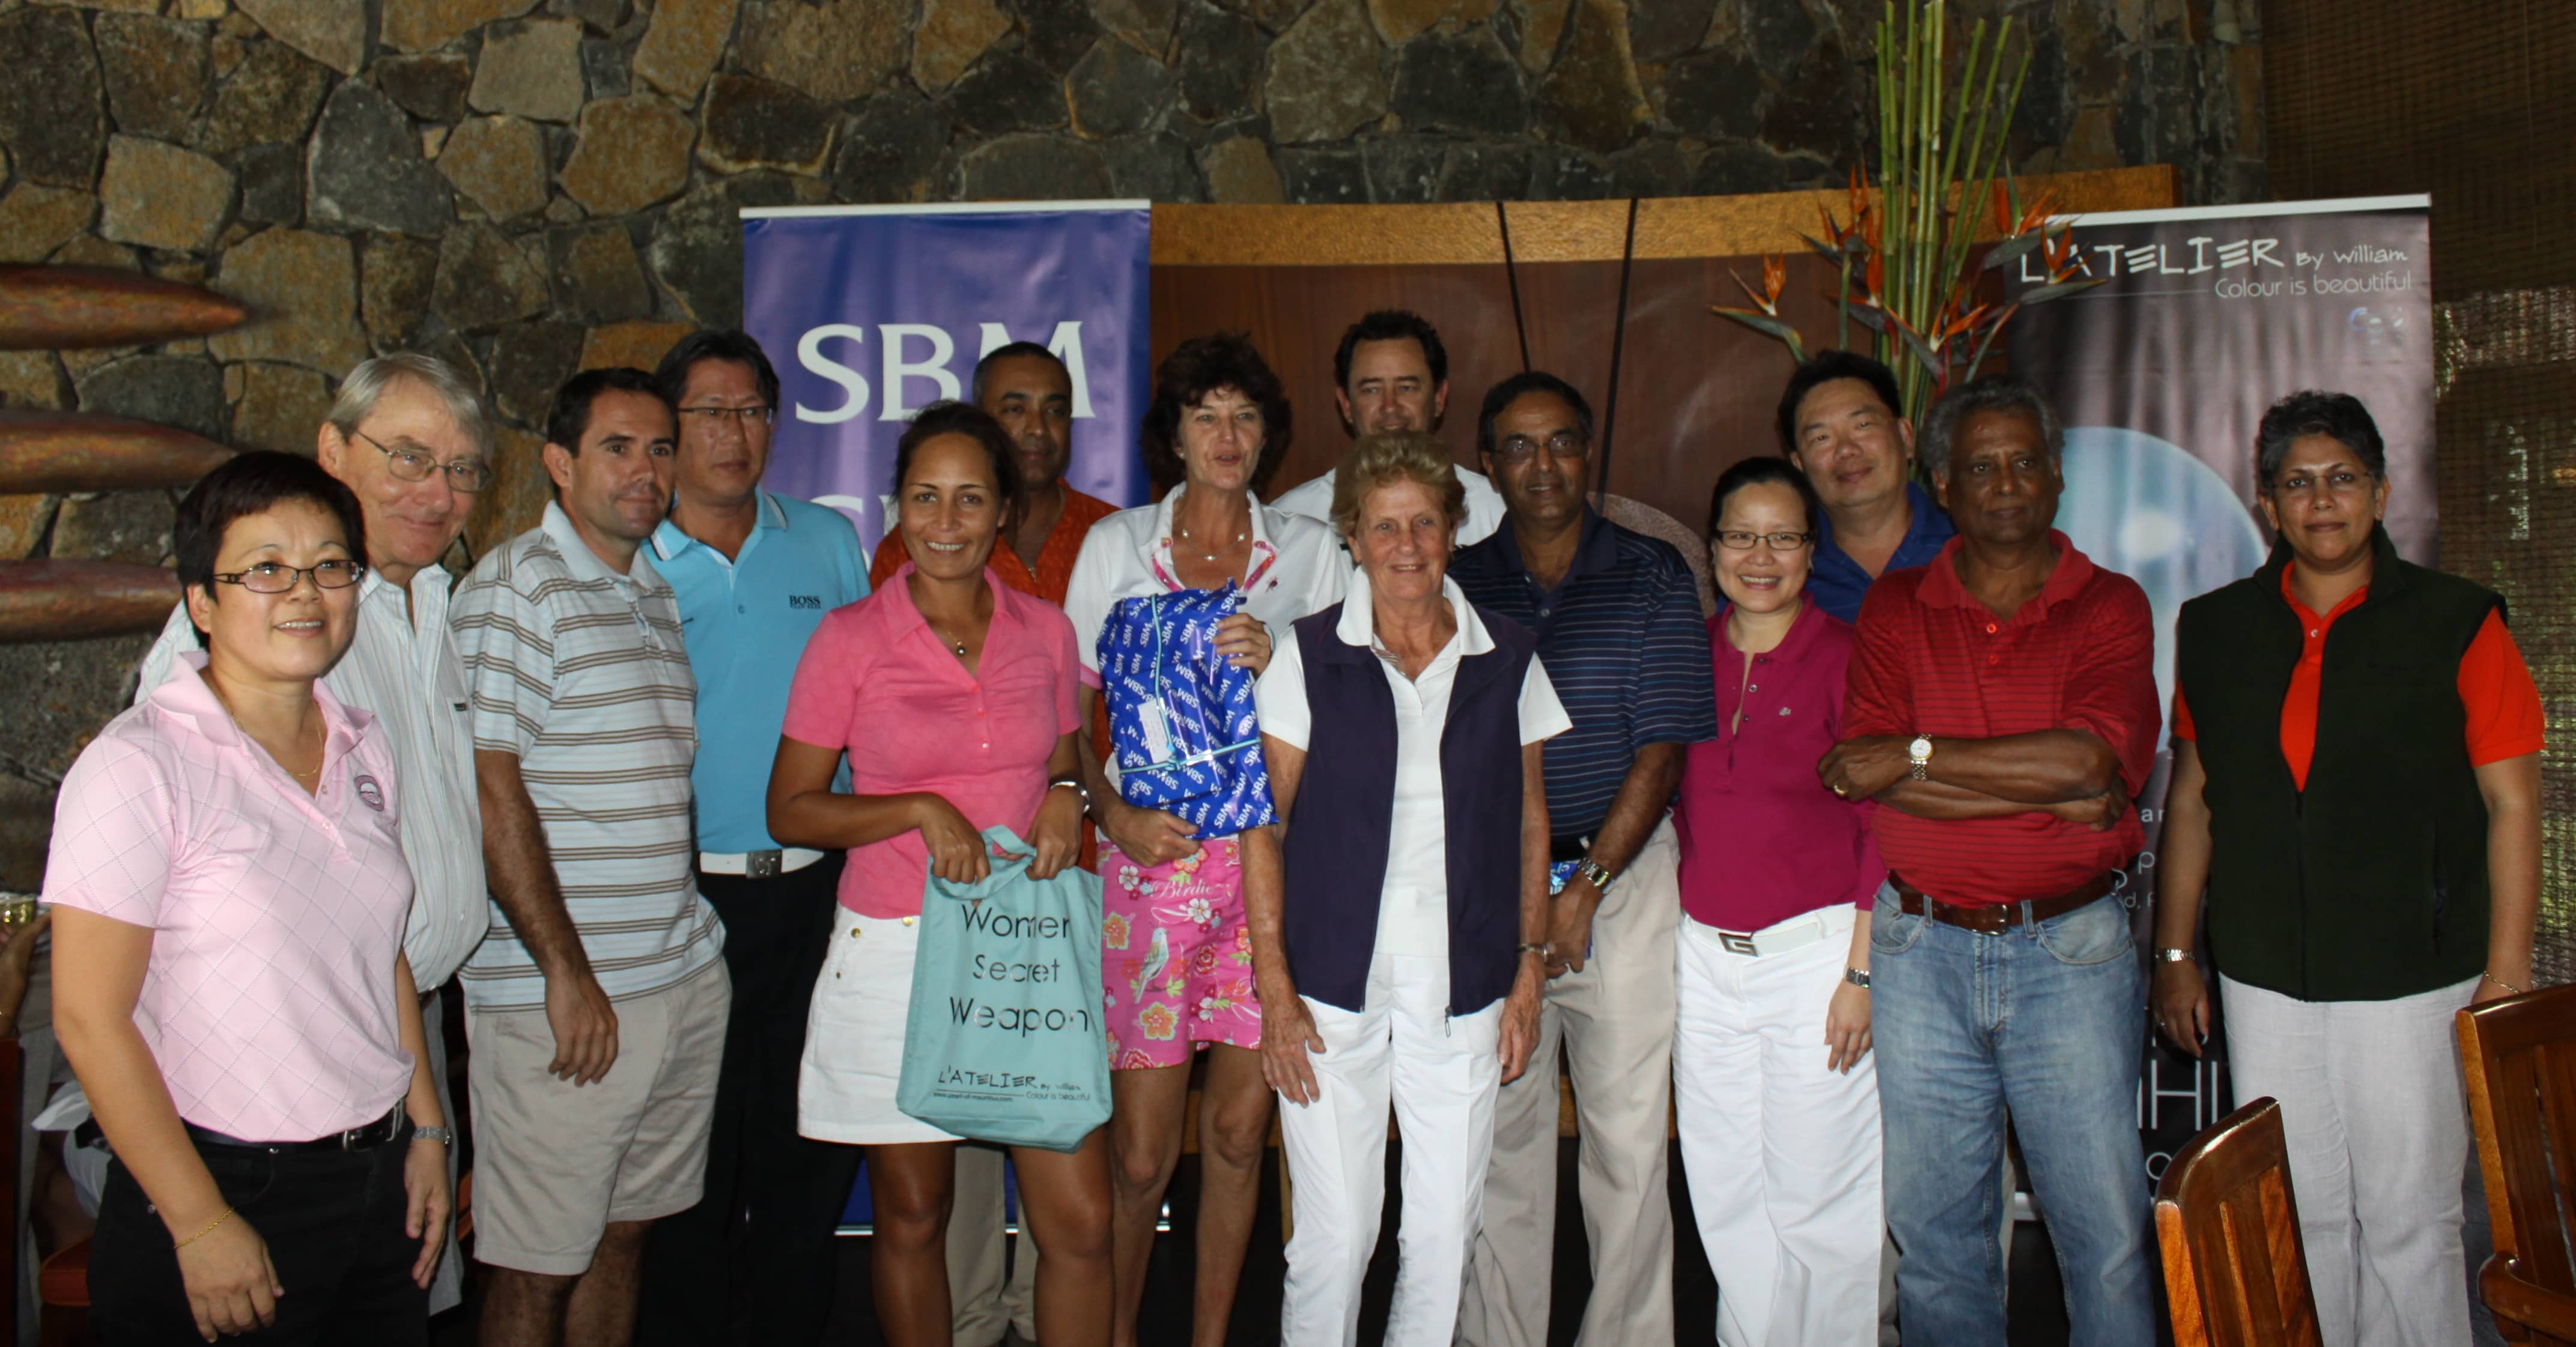 Golf Championships At Legend And Links Courses Constance Hotels Blog